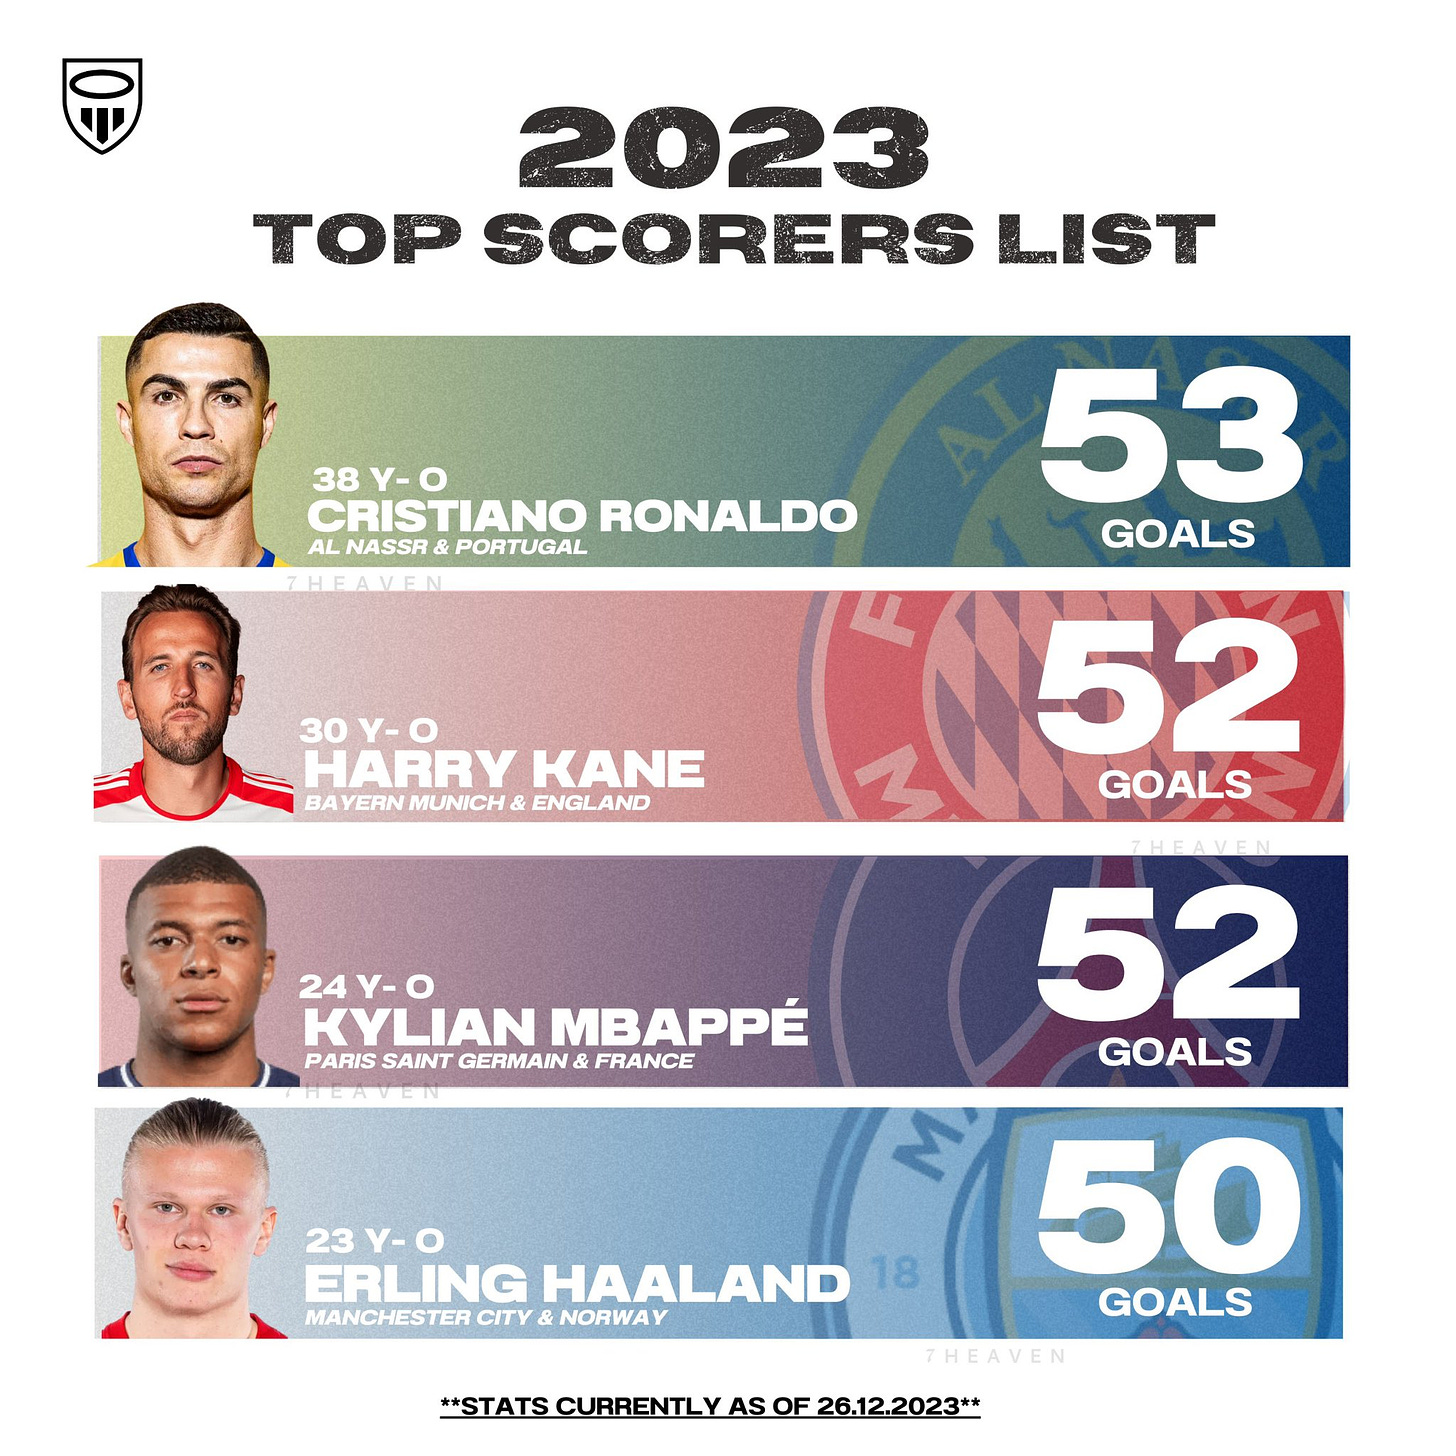 UzUmakiᵐᵃᵈʳᶦᵈᶦˢᵗᵃ on X: "Following a challenging year in 2022, Cristiano  Ronaldo made a remarkable comeback by scoring 53 goals in 2023,  outperforming even the best of the current young generation of players.